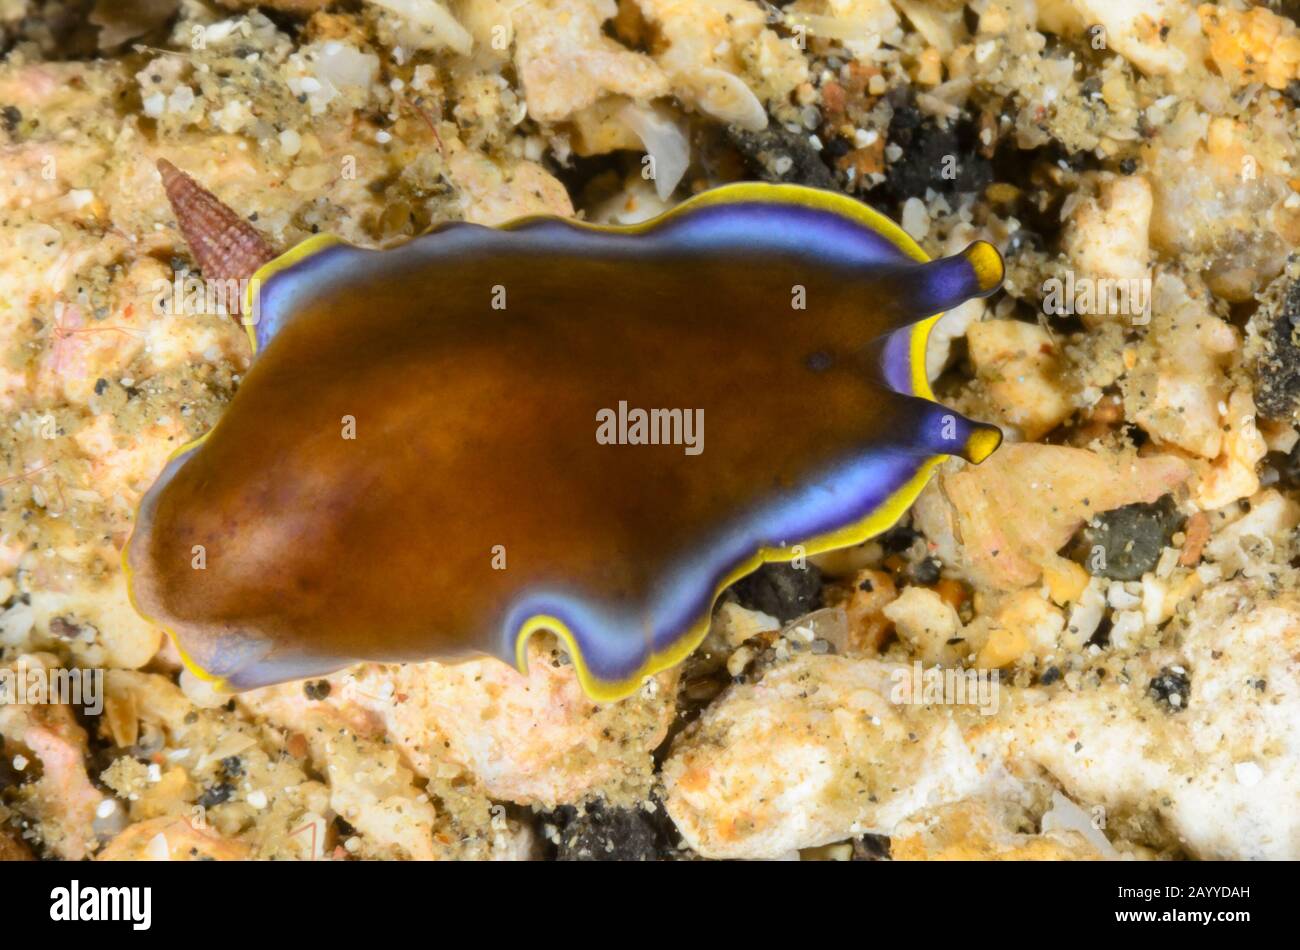 Marine flatworm, Pseudoceros prudhoei, Lembeh Strait, North Sulawesi, Indonesia, Pacific Stock Photo